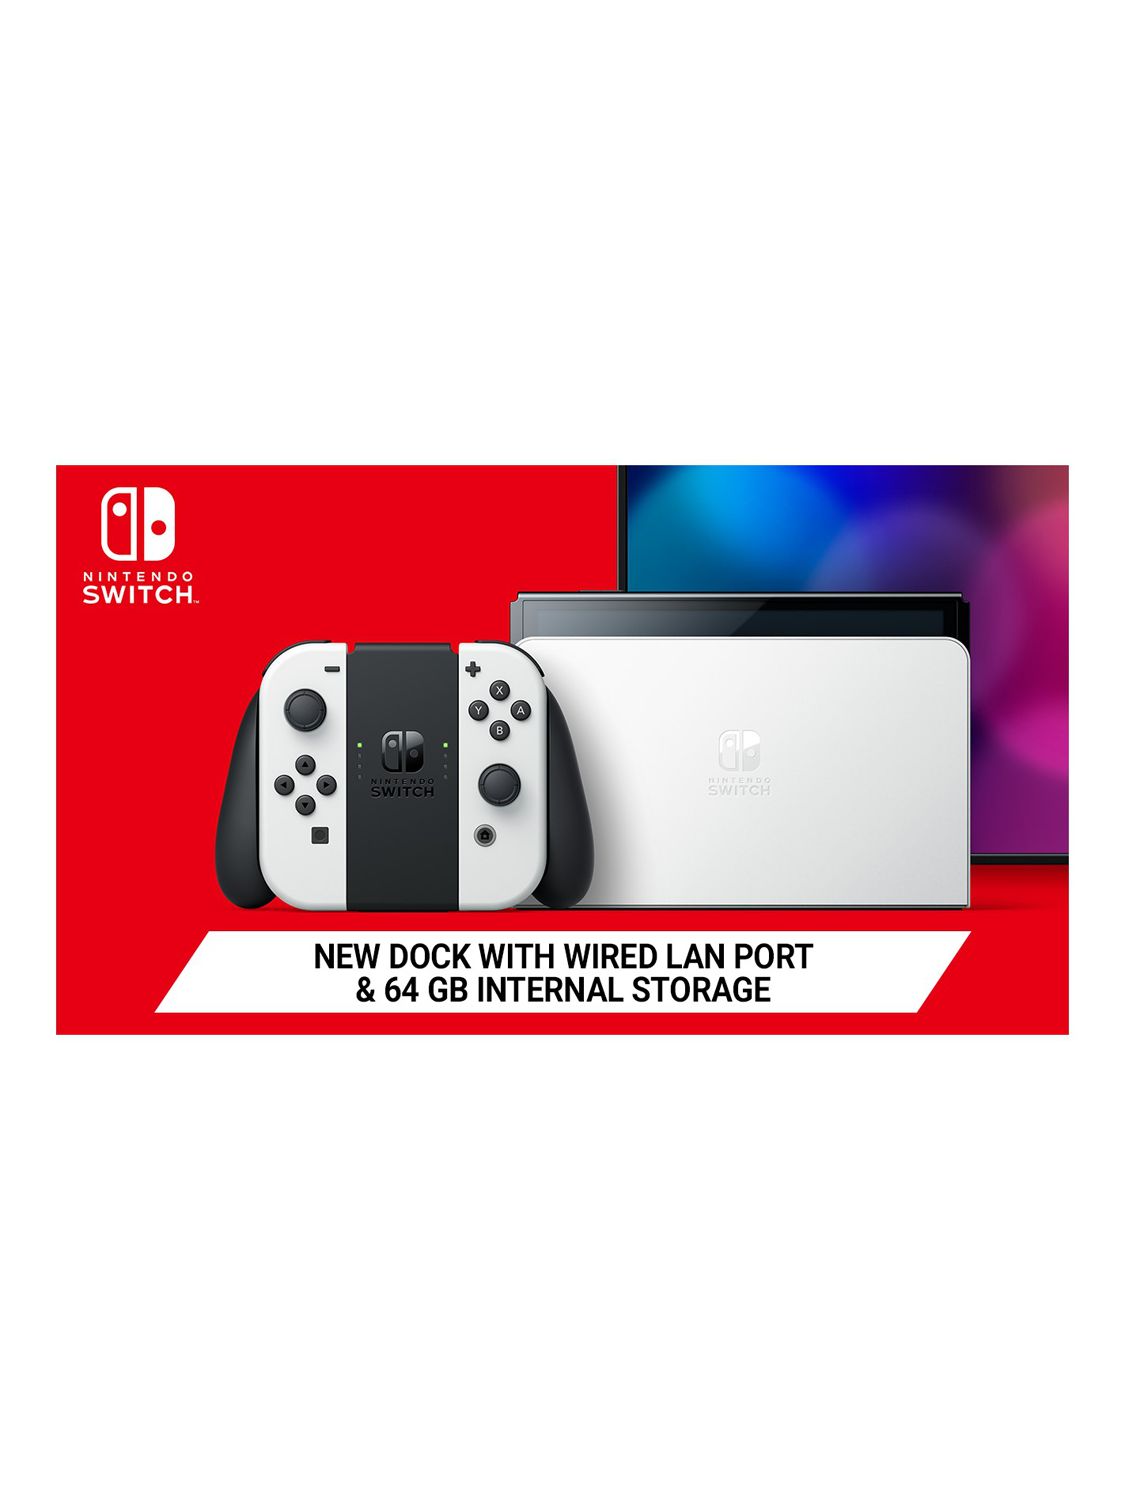 Nintendo Switch OLED Console White Joy-Con Controllers